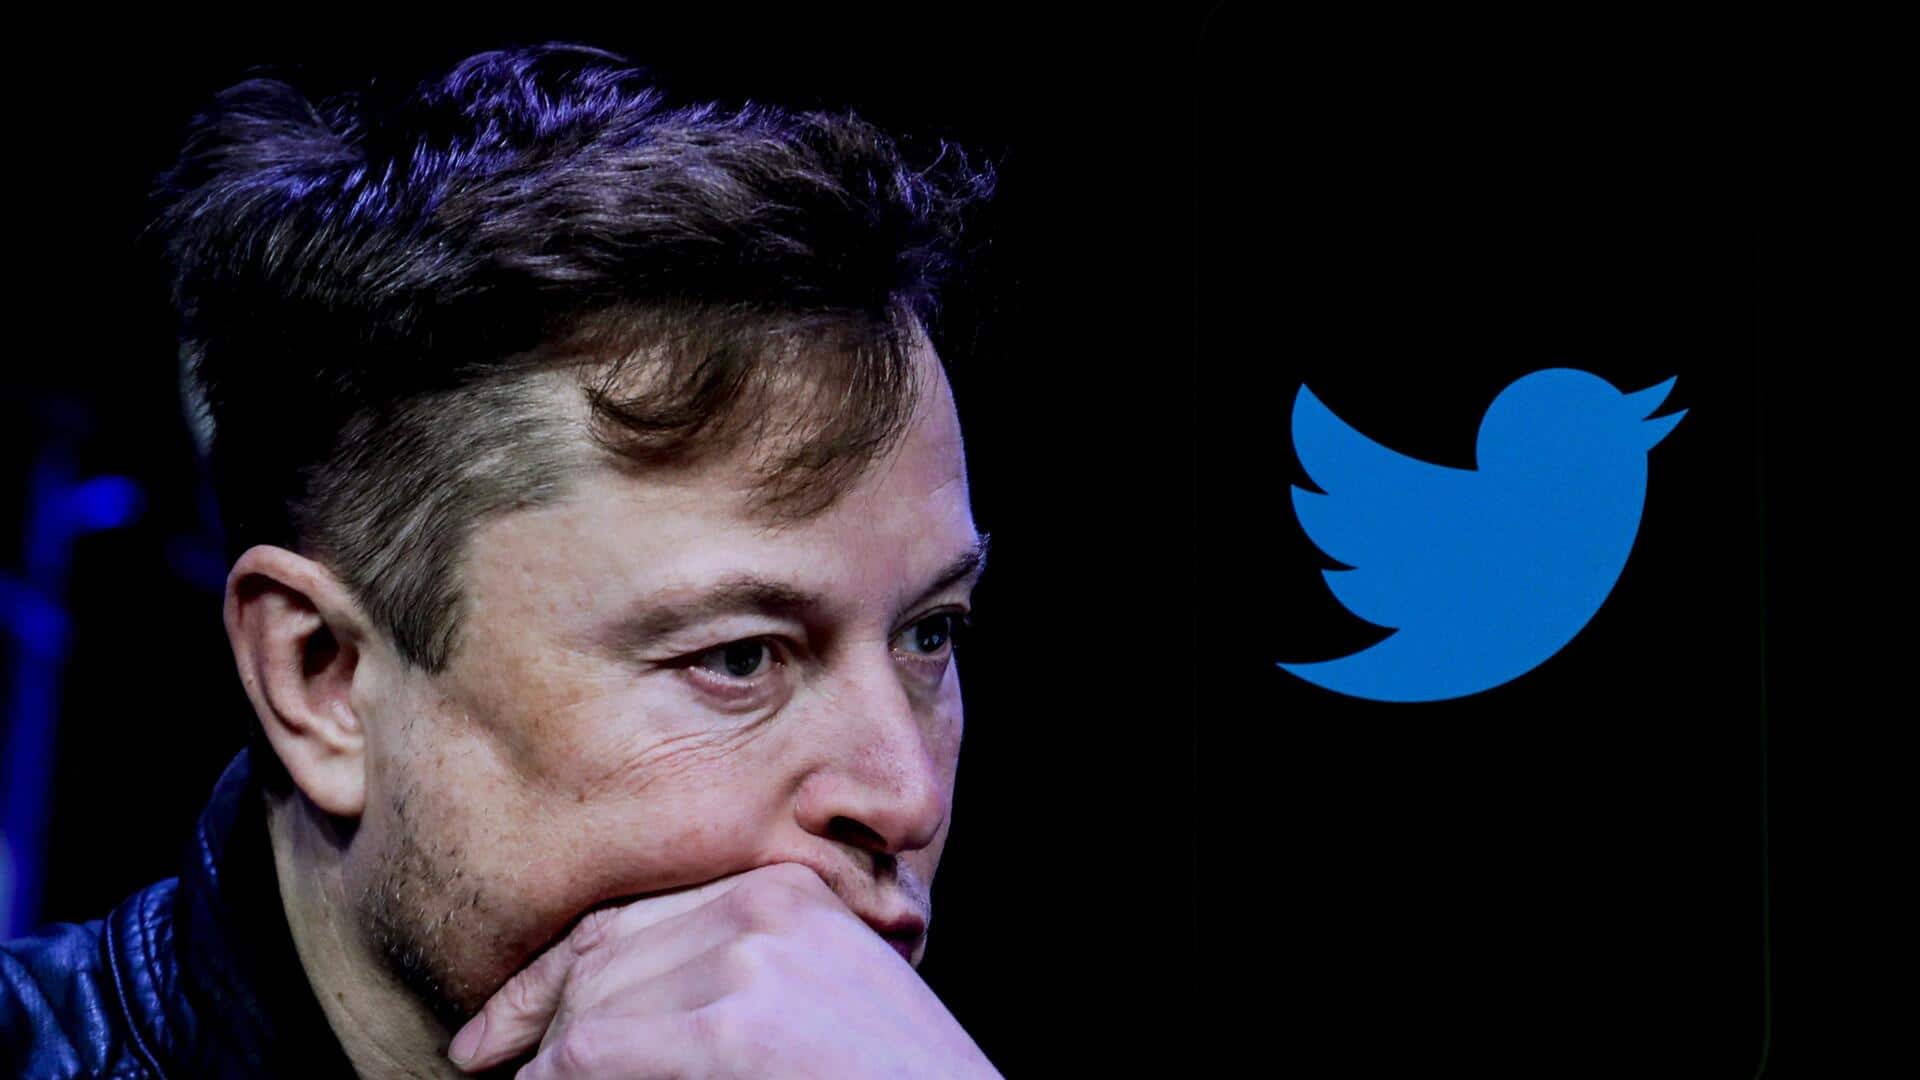 SEC accuses Elon Musk of distorting investigation into Twitter acquisition